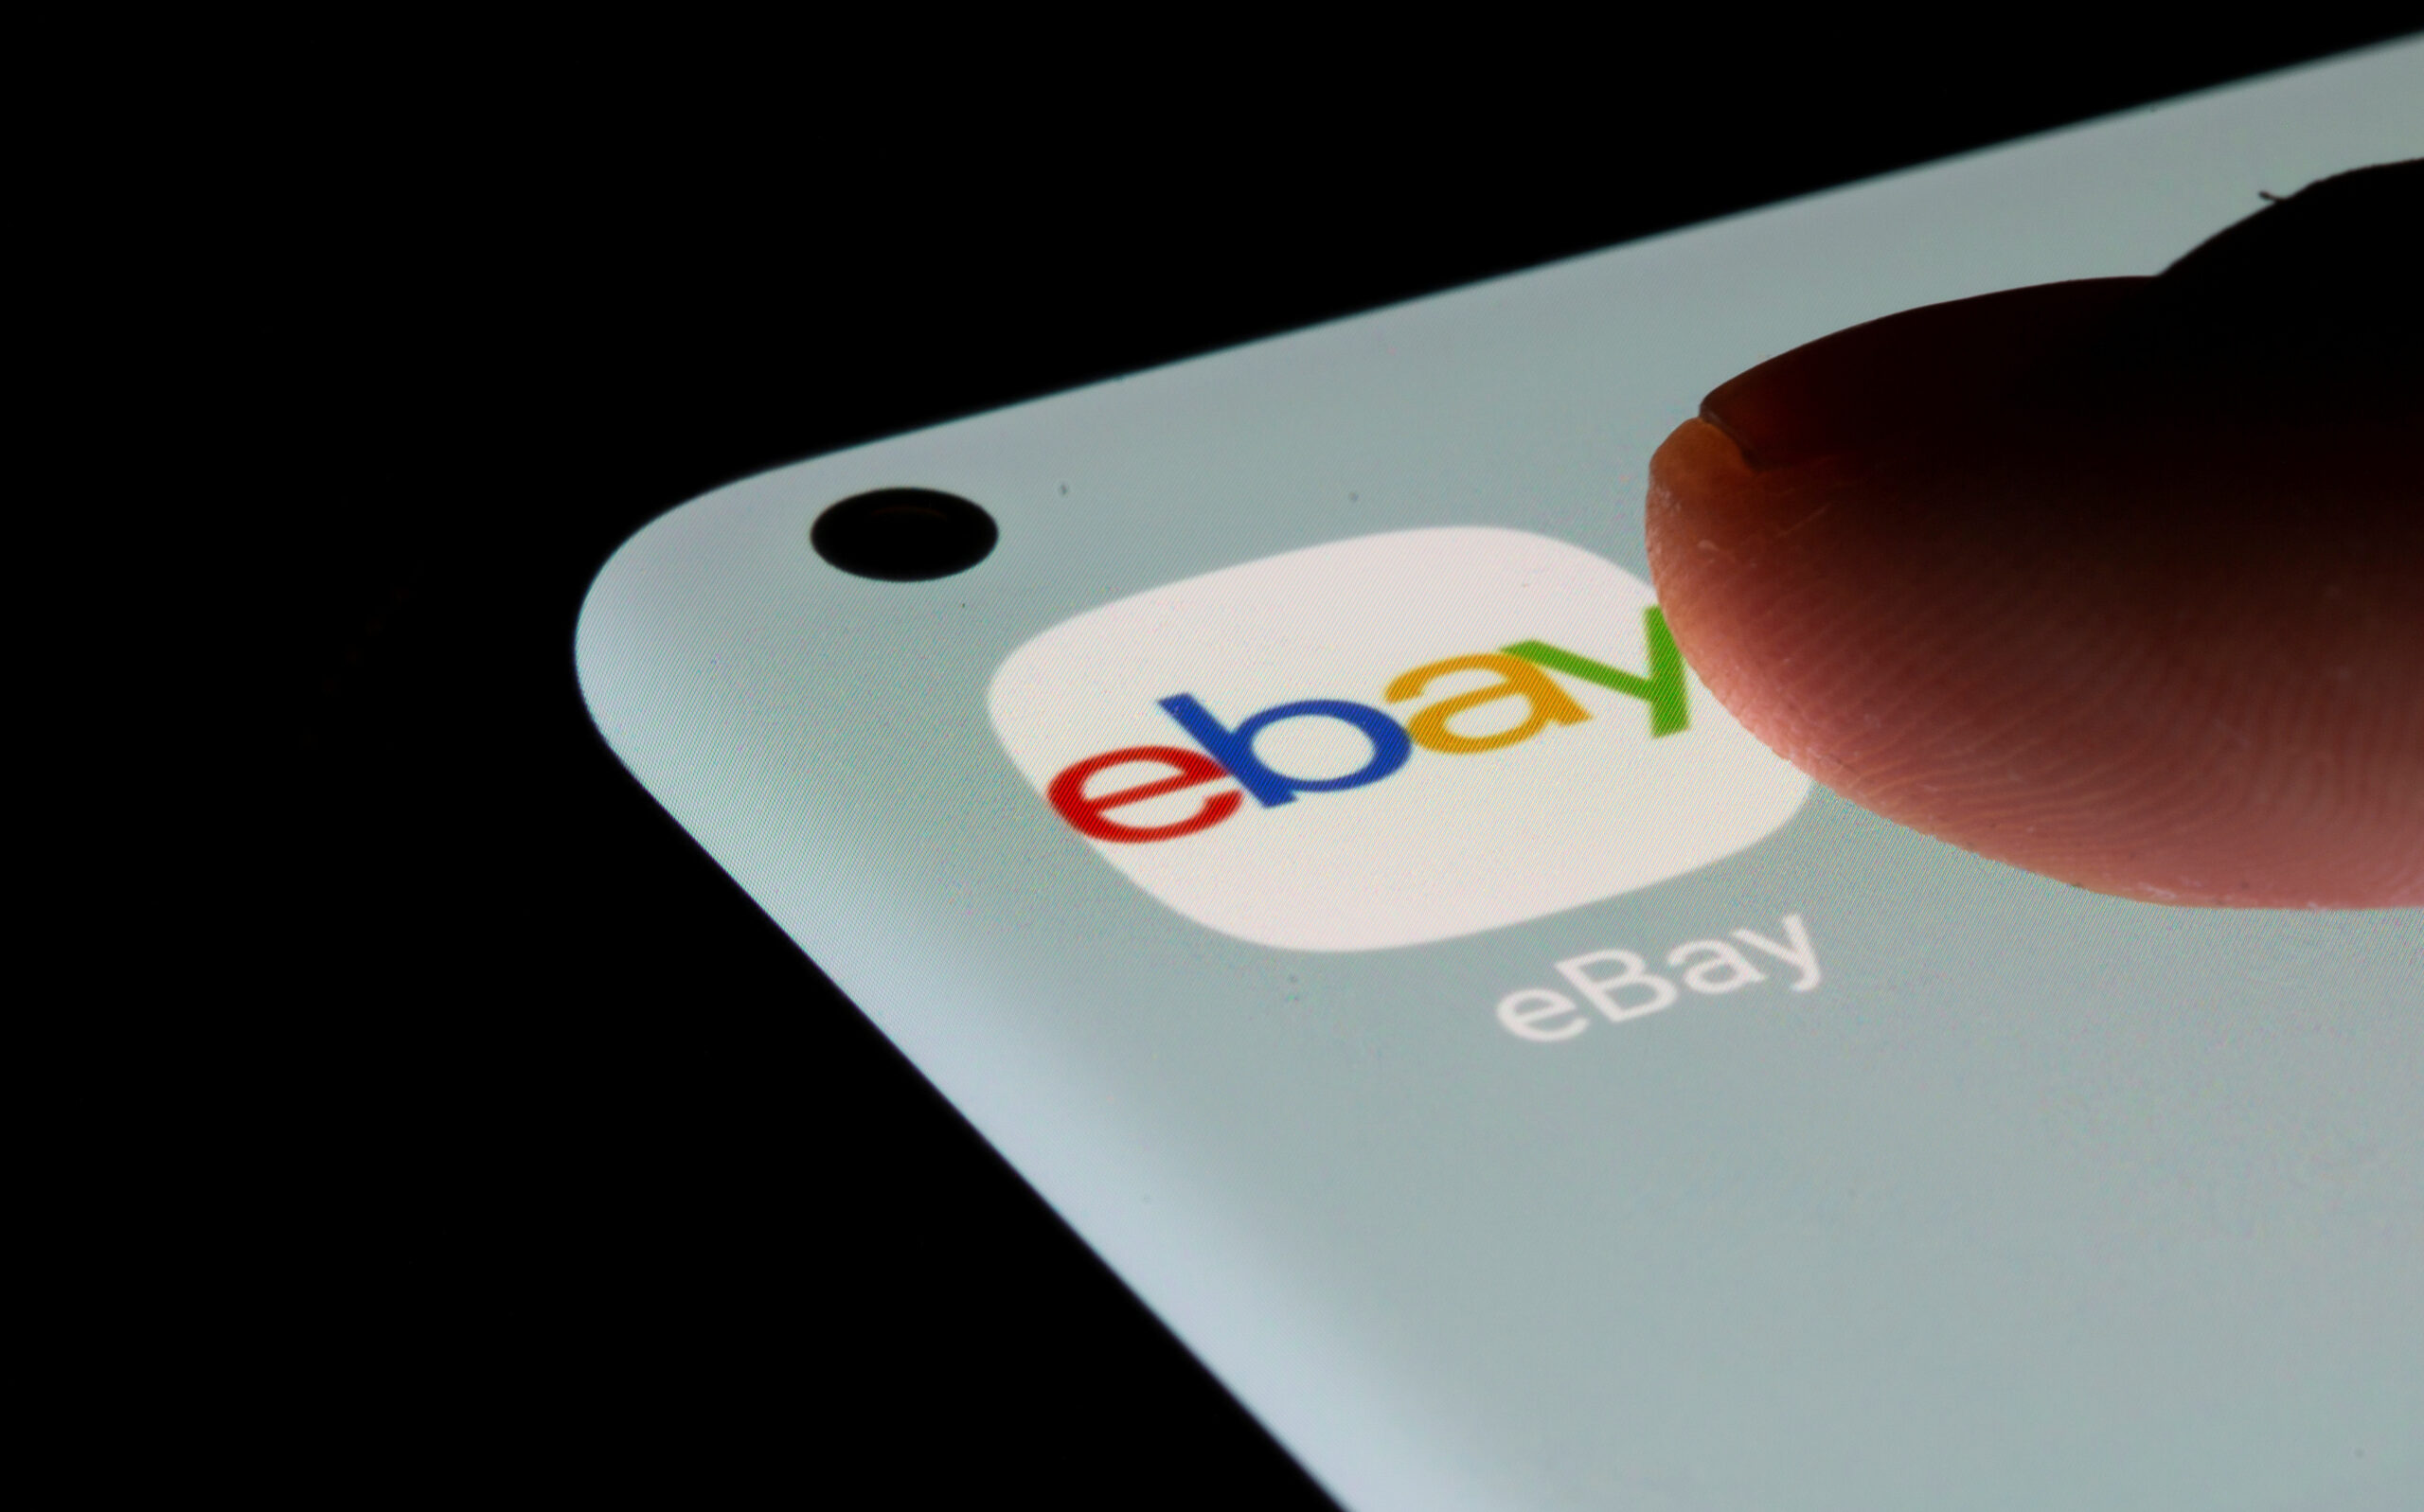 EBay To Cut 1,000 Jobs Due To Slow Growth